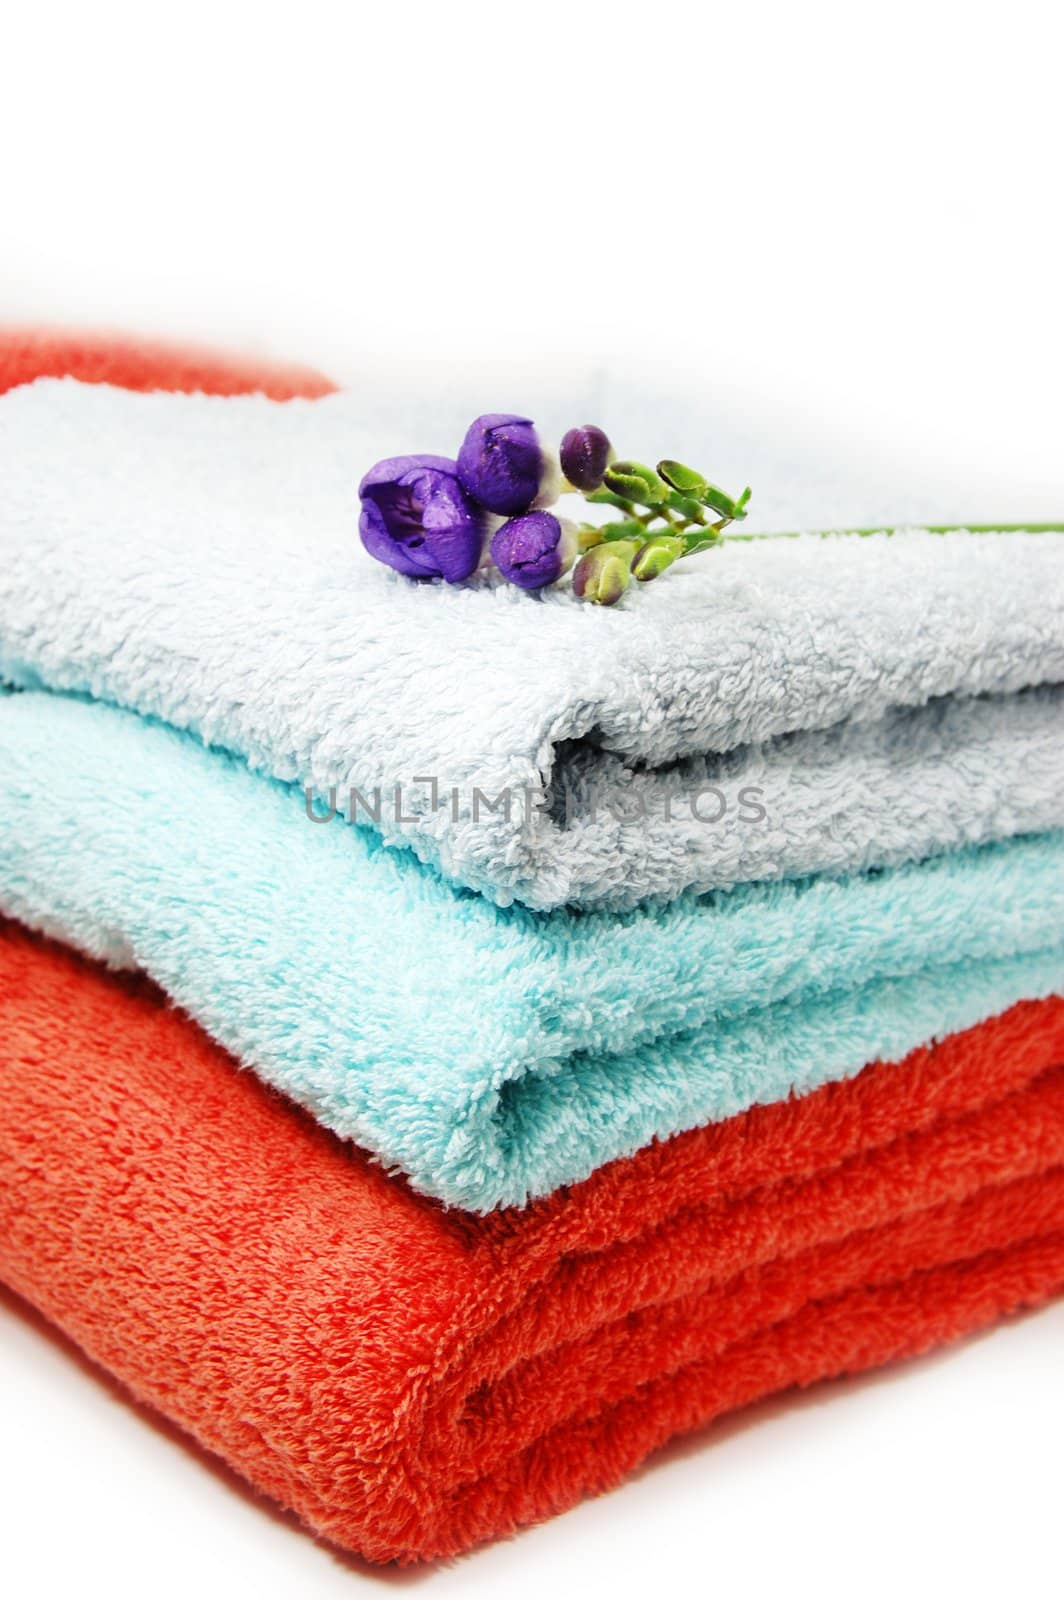 Towels by Angel_a